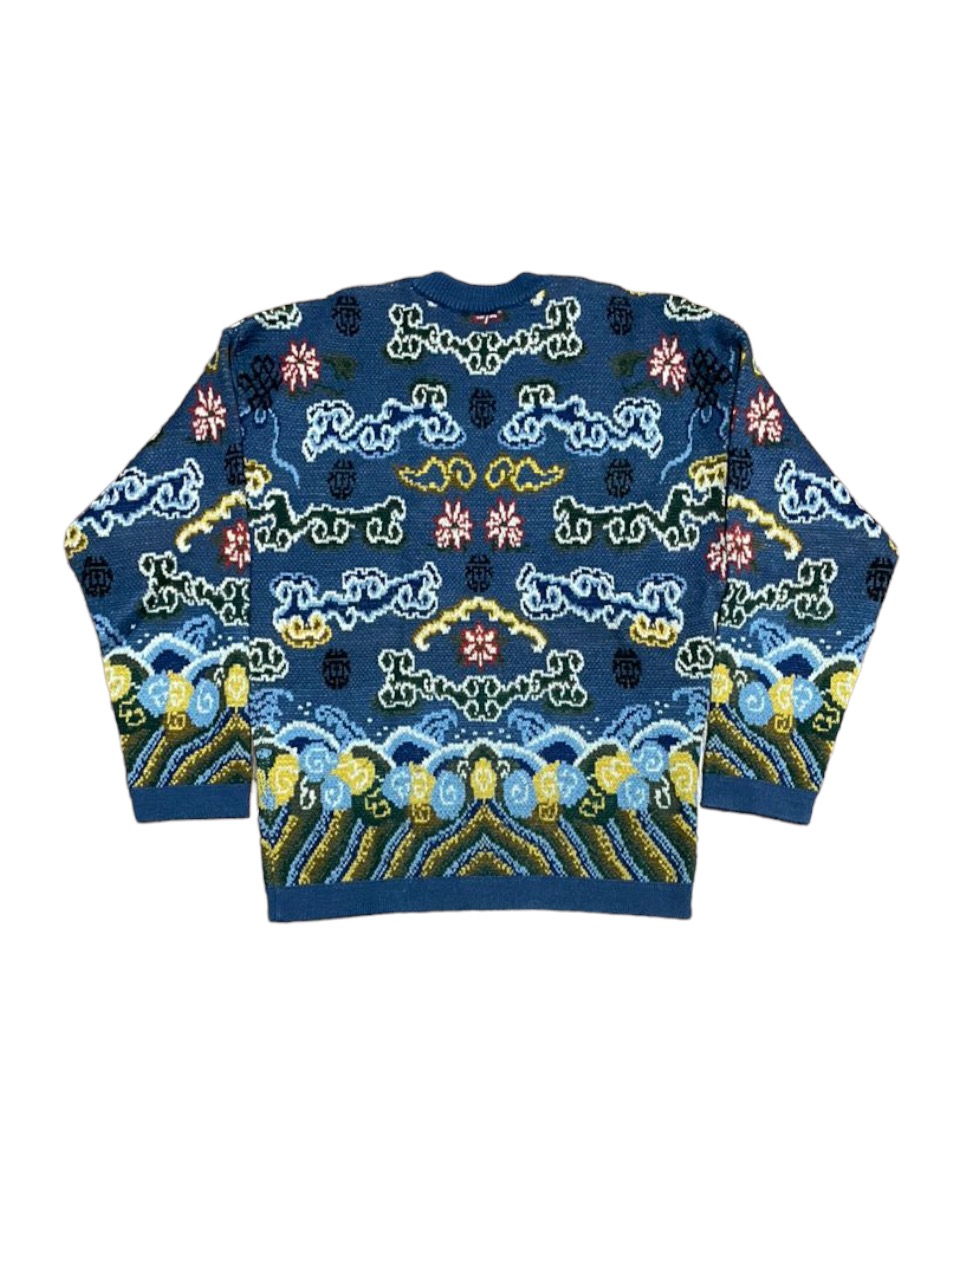 Rare🔥Kenzo AOP Knitted Iconic Cloud Distressed Sweater - 1